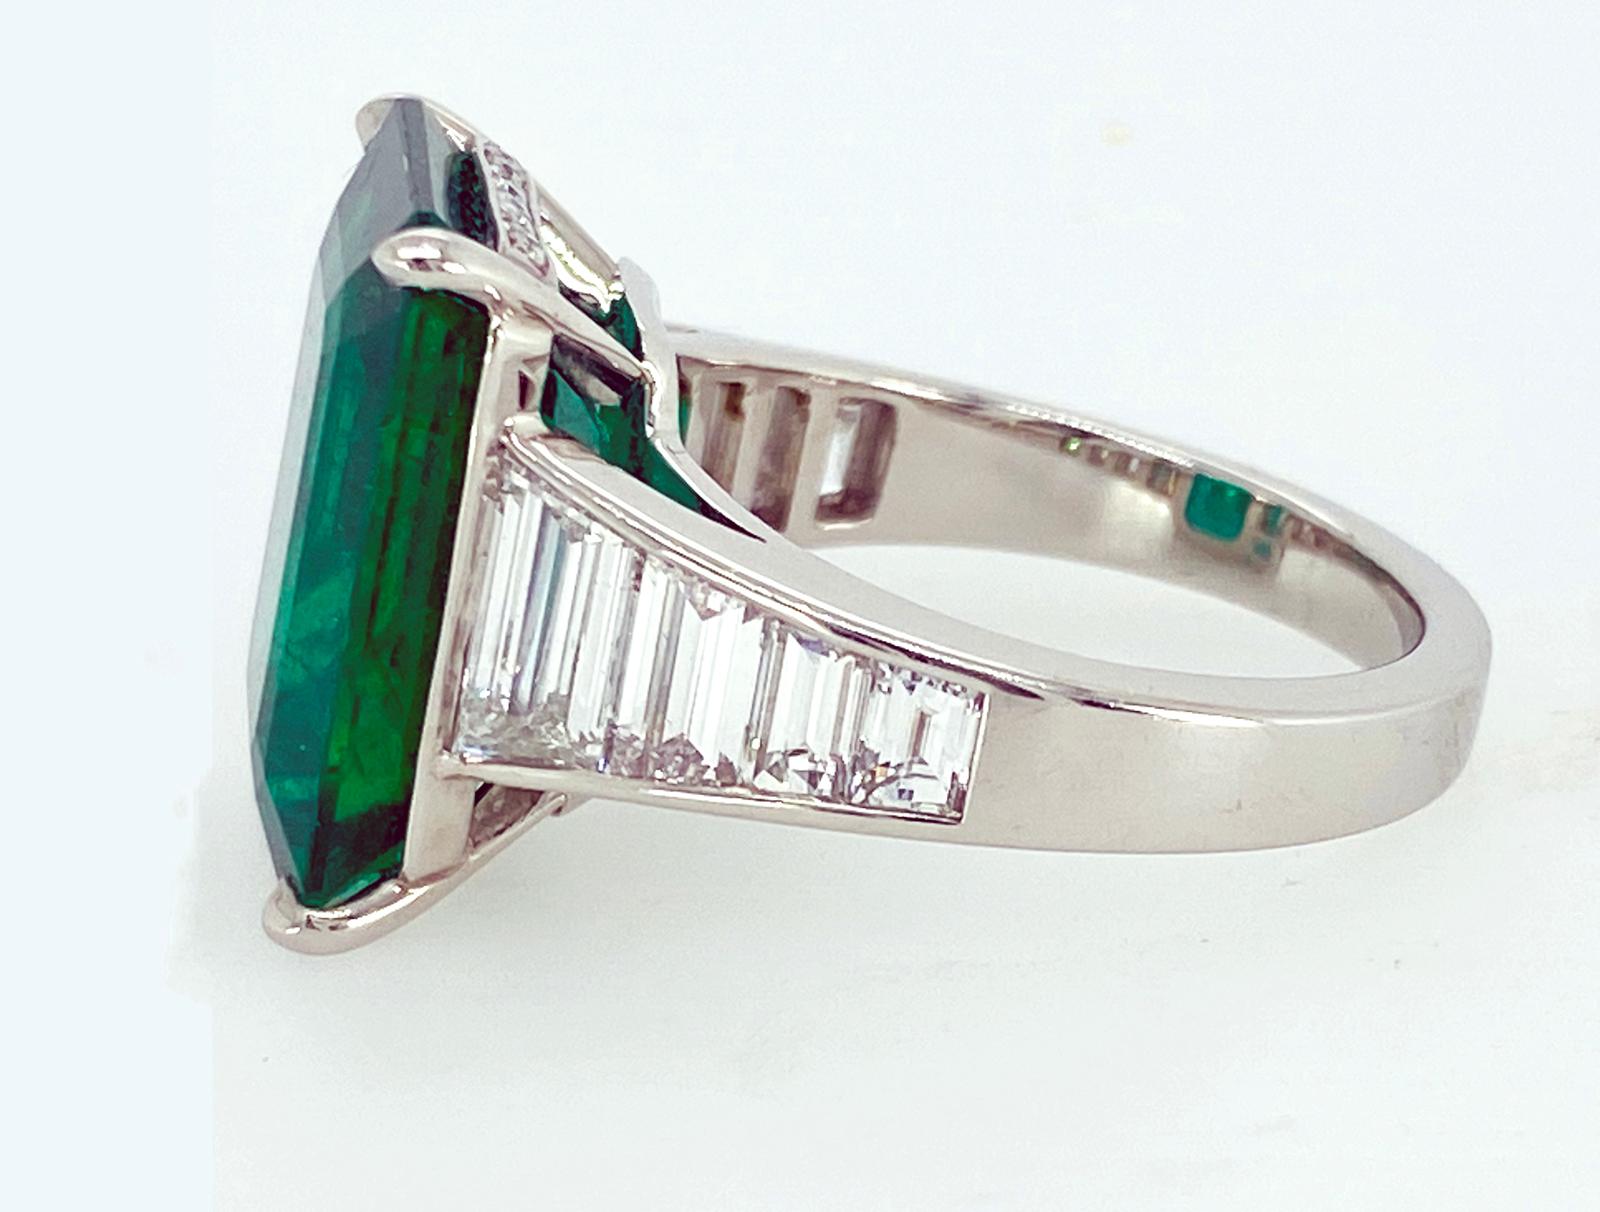 A single, emerald cut Emerald accented with six graduated emerald cut Diamonds is set in a hand fabricated,  Platinum setting.
Certified

Emerald:  8.88 carats
Eight Emerald cut Diamonds (5mm down to 3mm in length) and Diamond pave, 1.94 carats